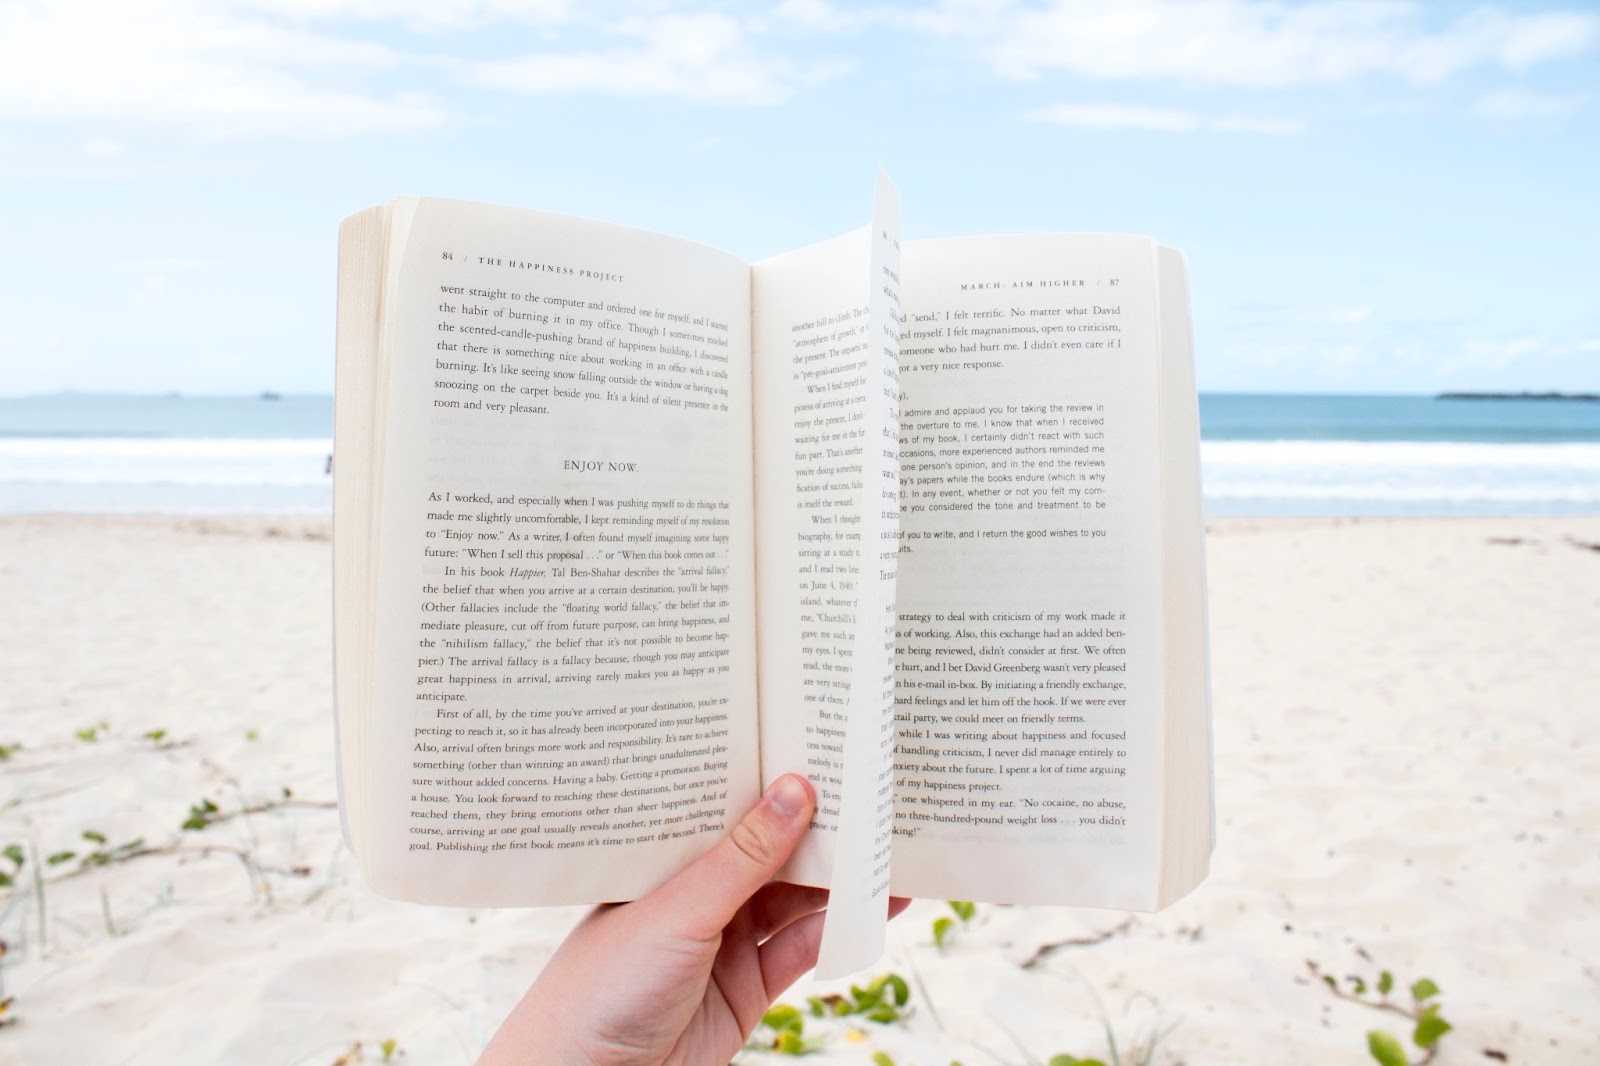 A soothing background while reading a book can create a relaxing environment during vacations. 